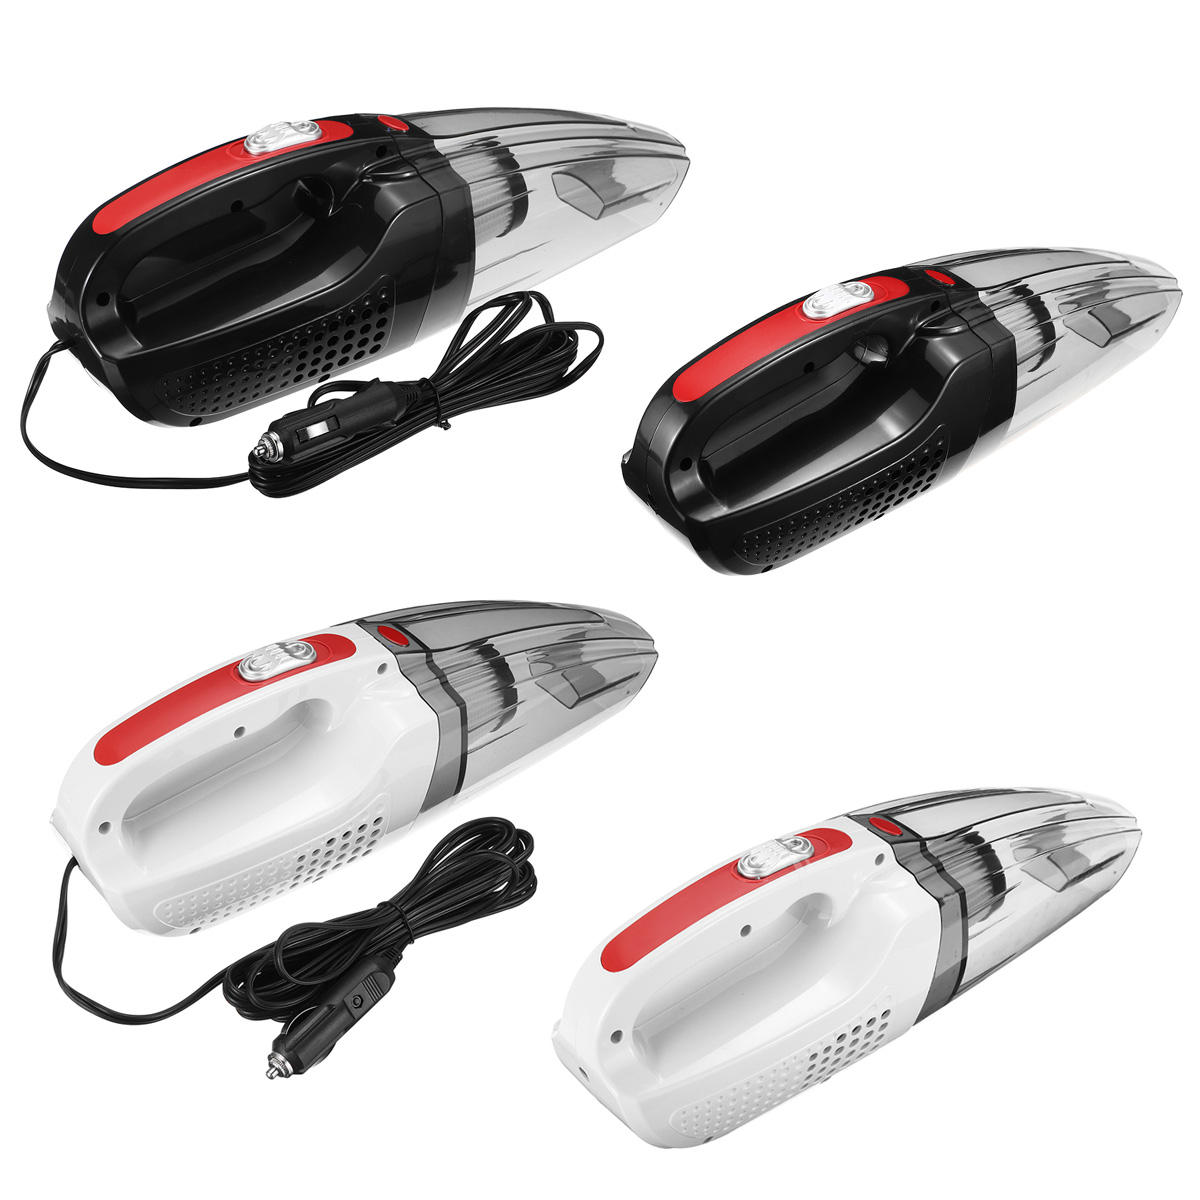 Cordless/ With Cord Rechargeable Vacuum Cleaner Portable Wet Dry Handheld 120W Car Home